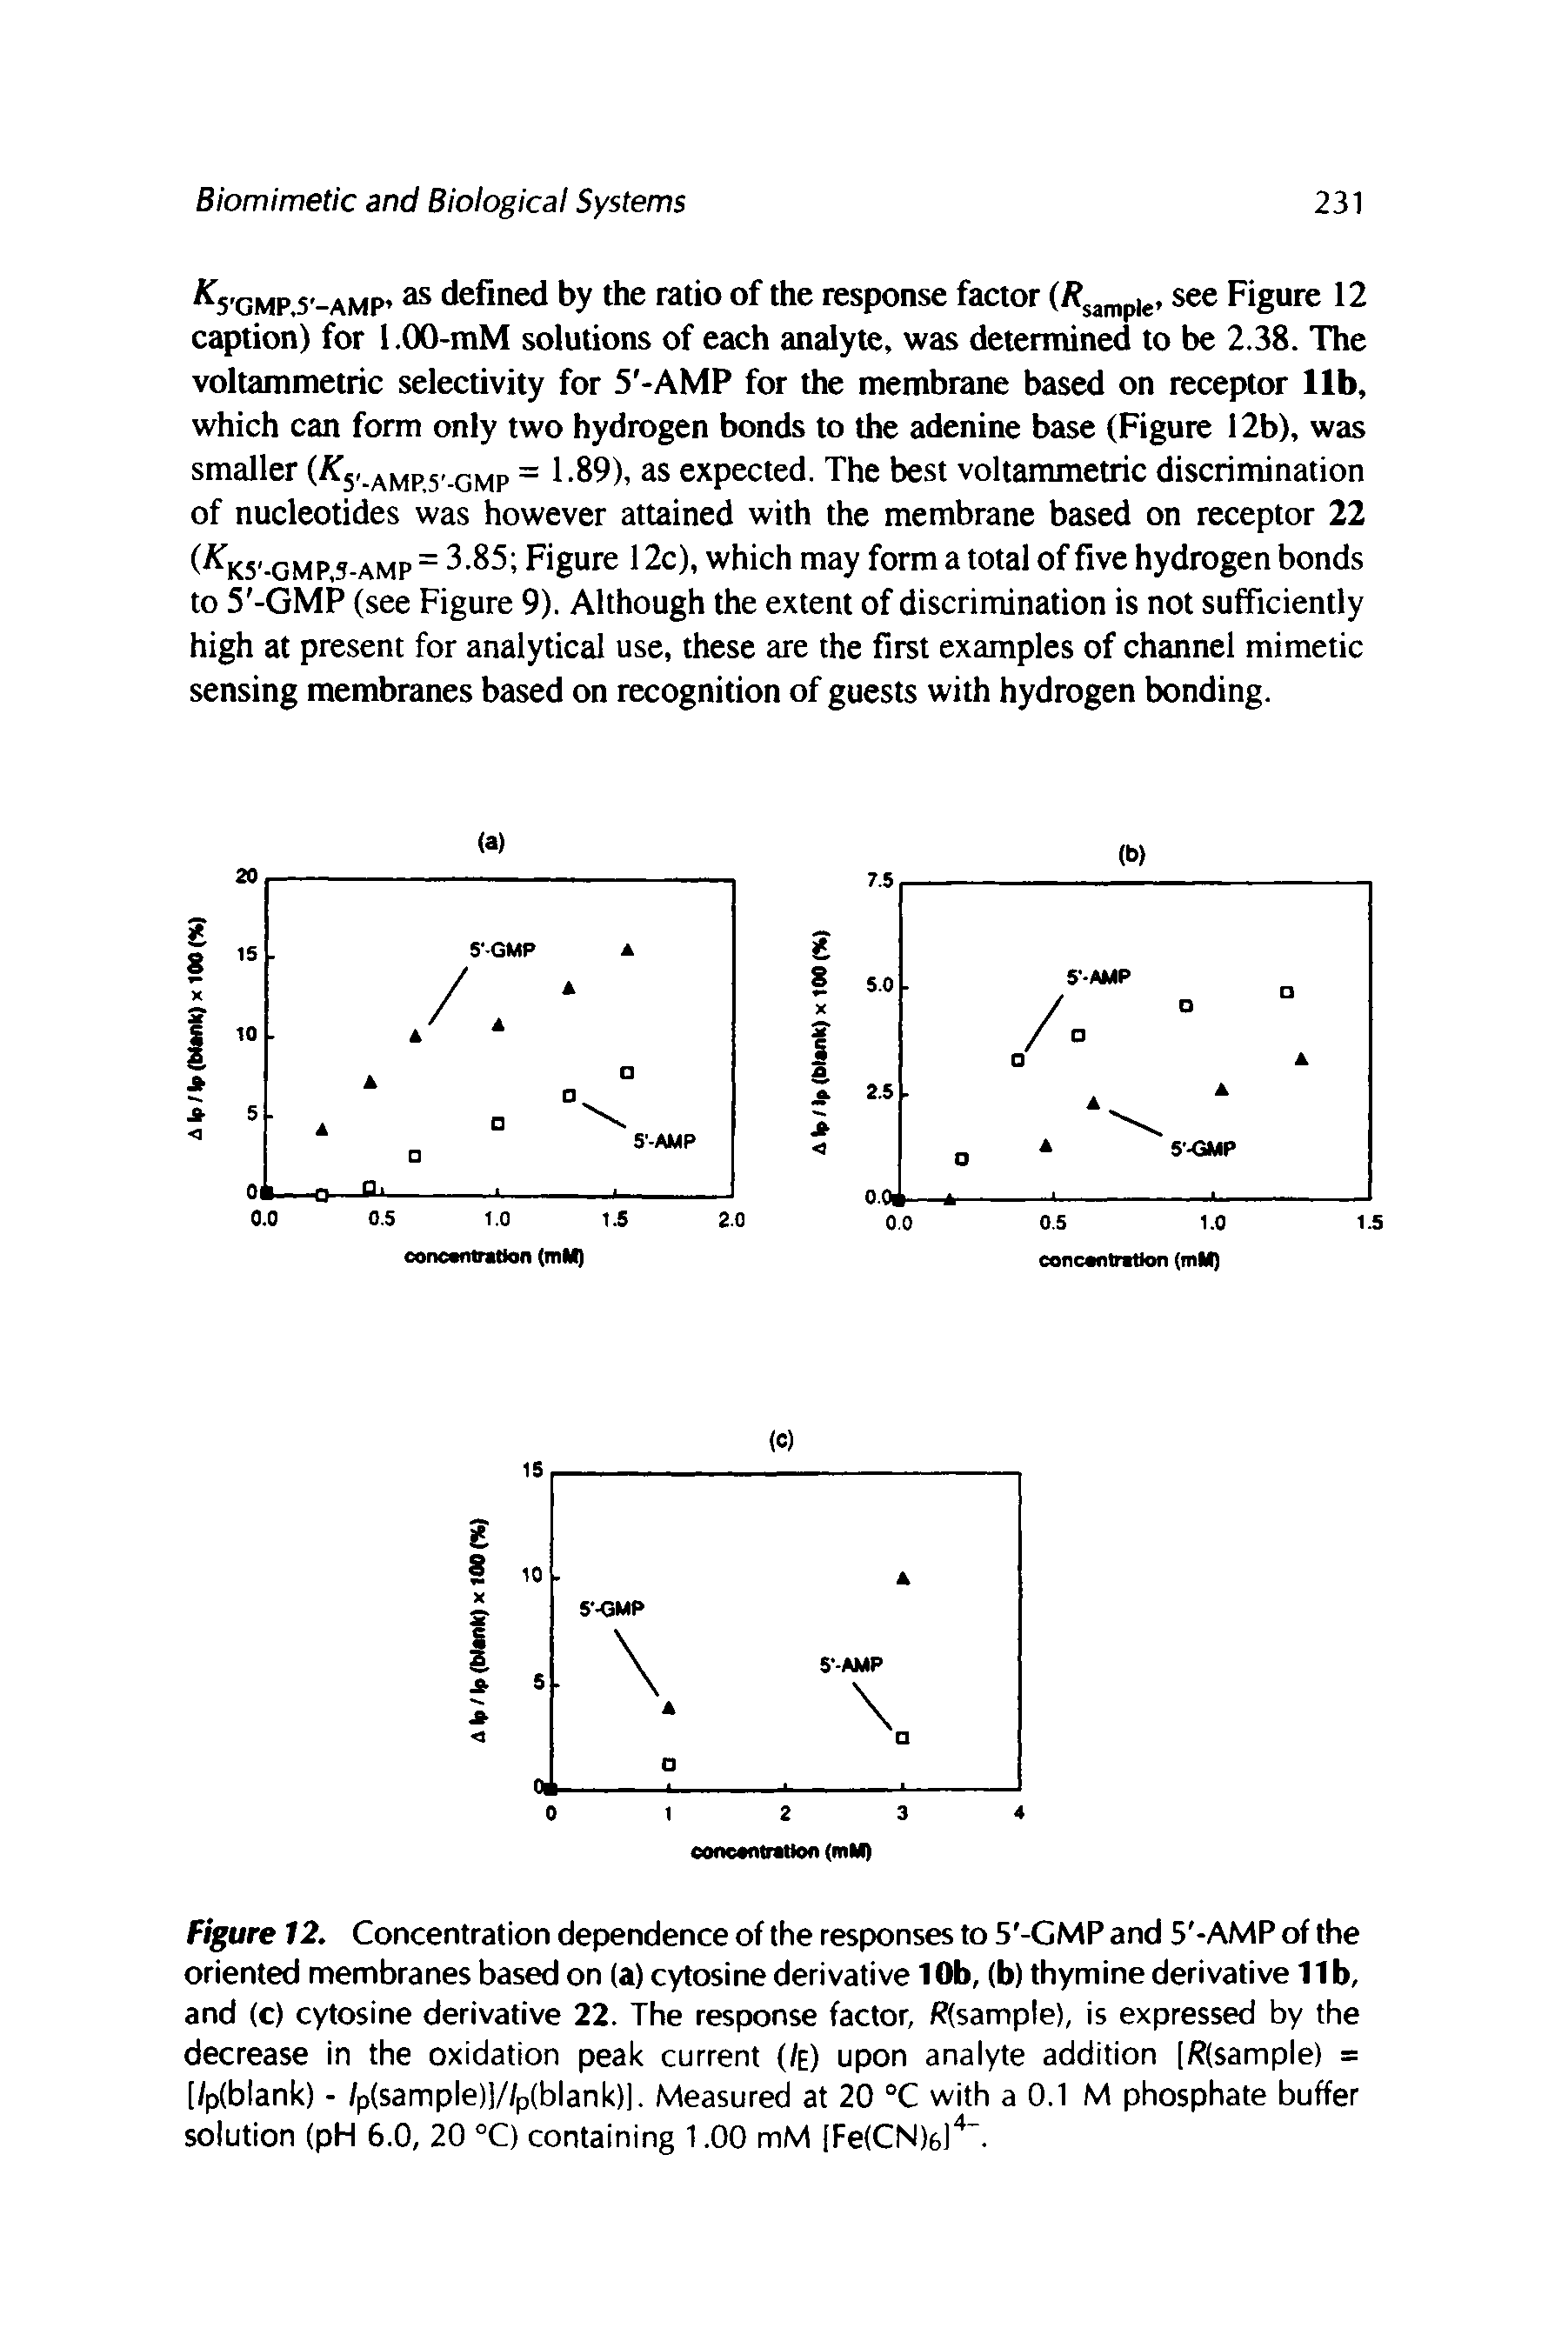 Figure 12. Concentration dependence of the responses to 5 -GMP and 5 -AMP of the oriented membranes based on (a) cytosine derivative 10b, (b) thymine derivative 11b, and (c) cytosine derivative 22. The response factor, (sample), is expressed by the decrease in the oxidation peak current (/e) upon analyte addition [/ (sample) = [/p(blank) - /P(sample)]//P(blank)]. Measured at 20 °C with a 0.1 M phosphate buffer solution (pH 6.0, 20 °C) containing 1.00 mM [Fe(CN)6l4. ...